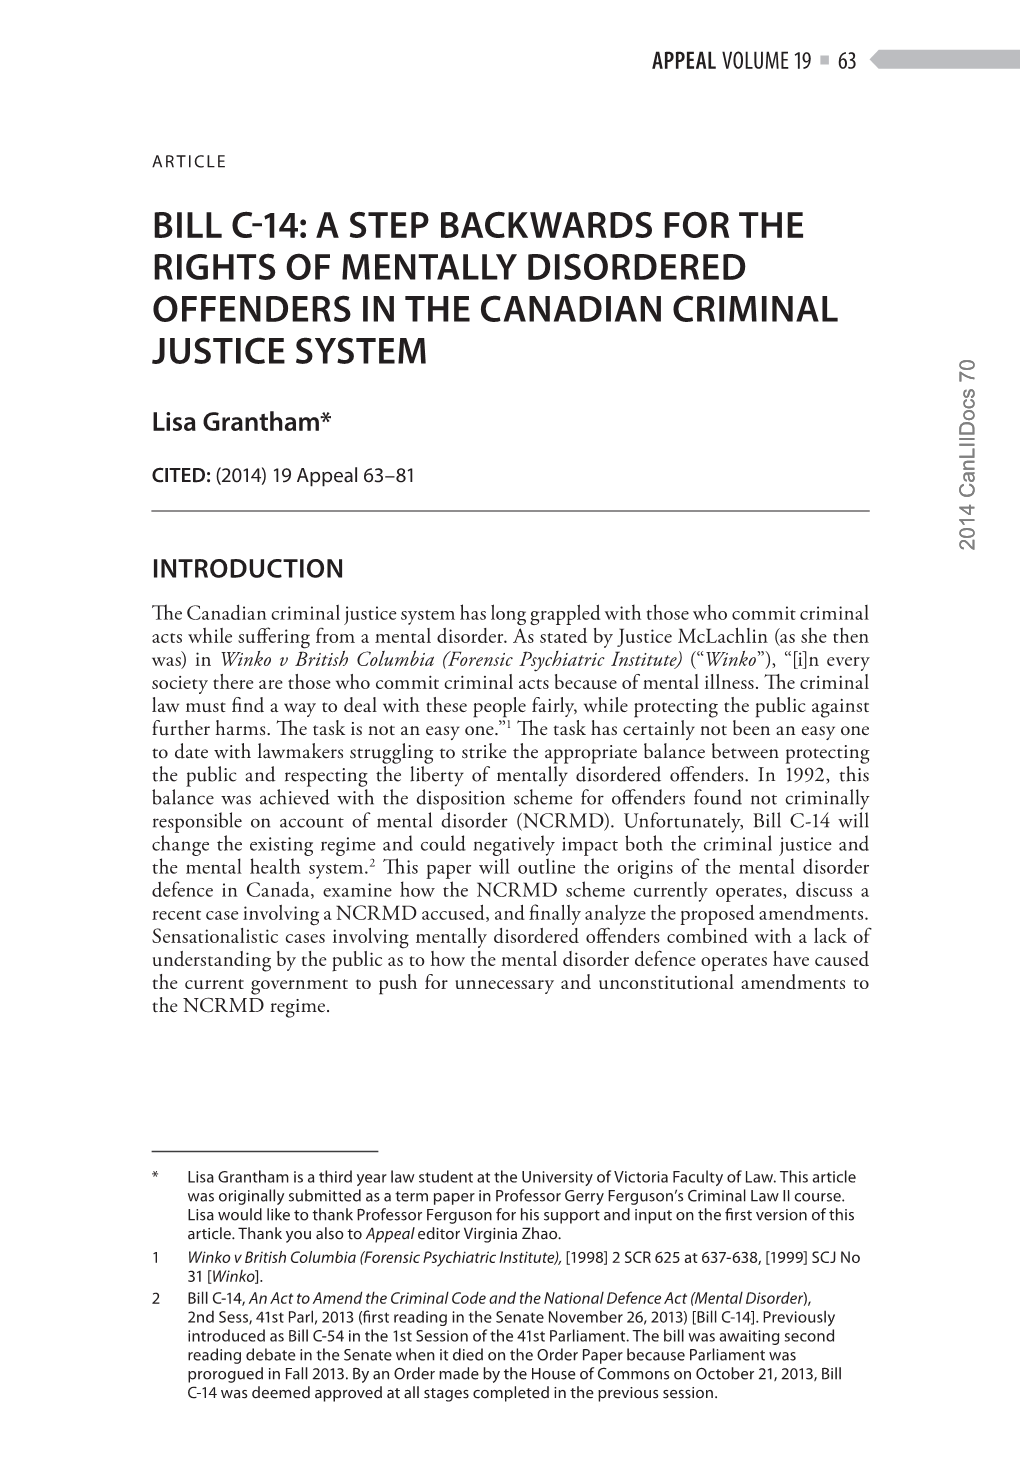 Bill C-14: a Step Backwards for the Rights of Mentally Disordered Offenders in the Canadian Criminal Justice System